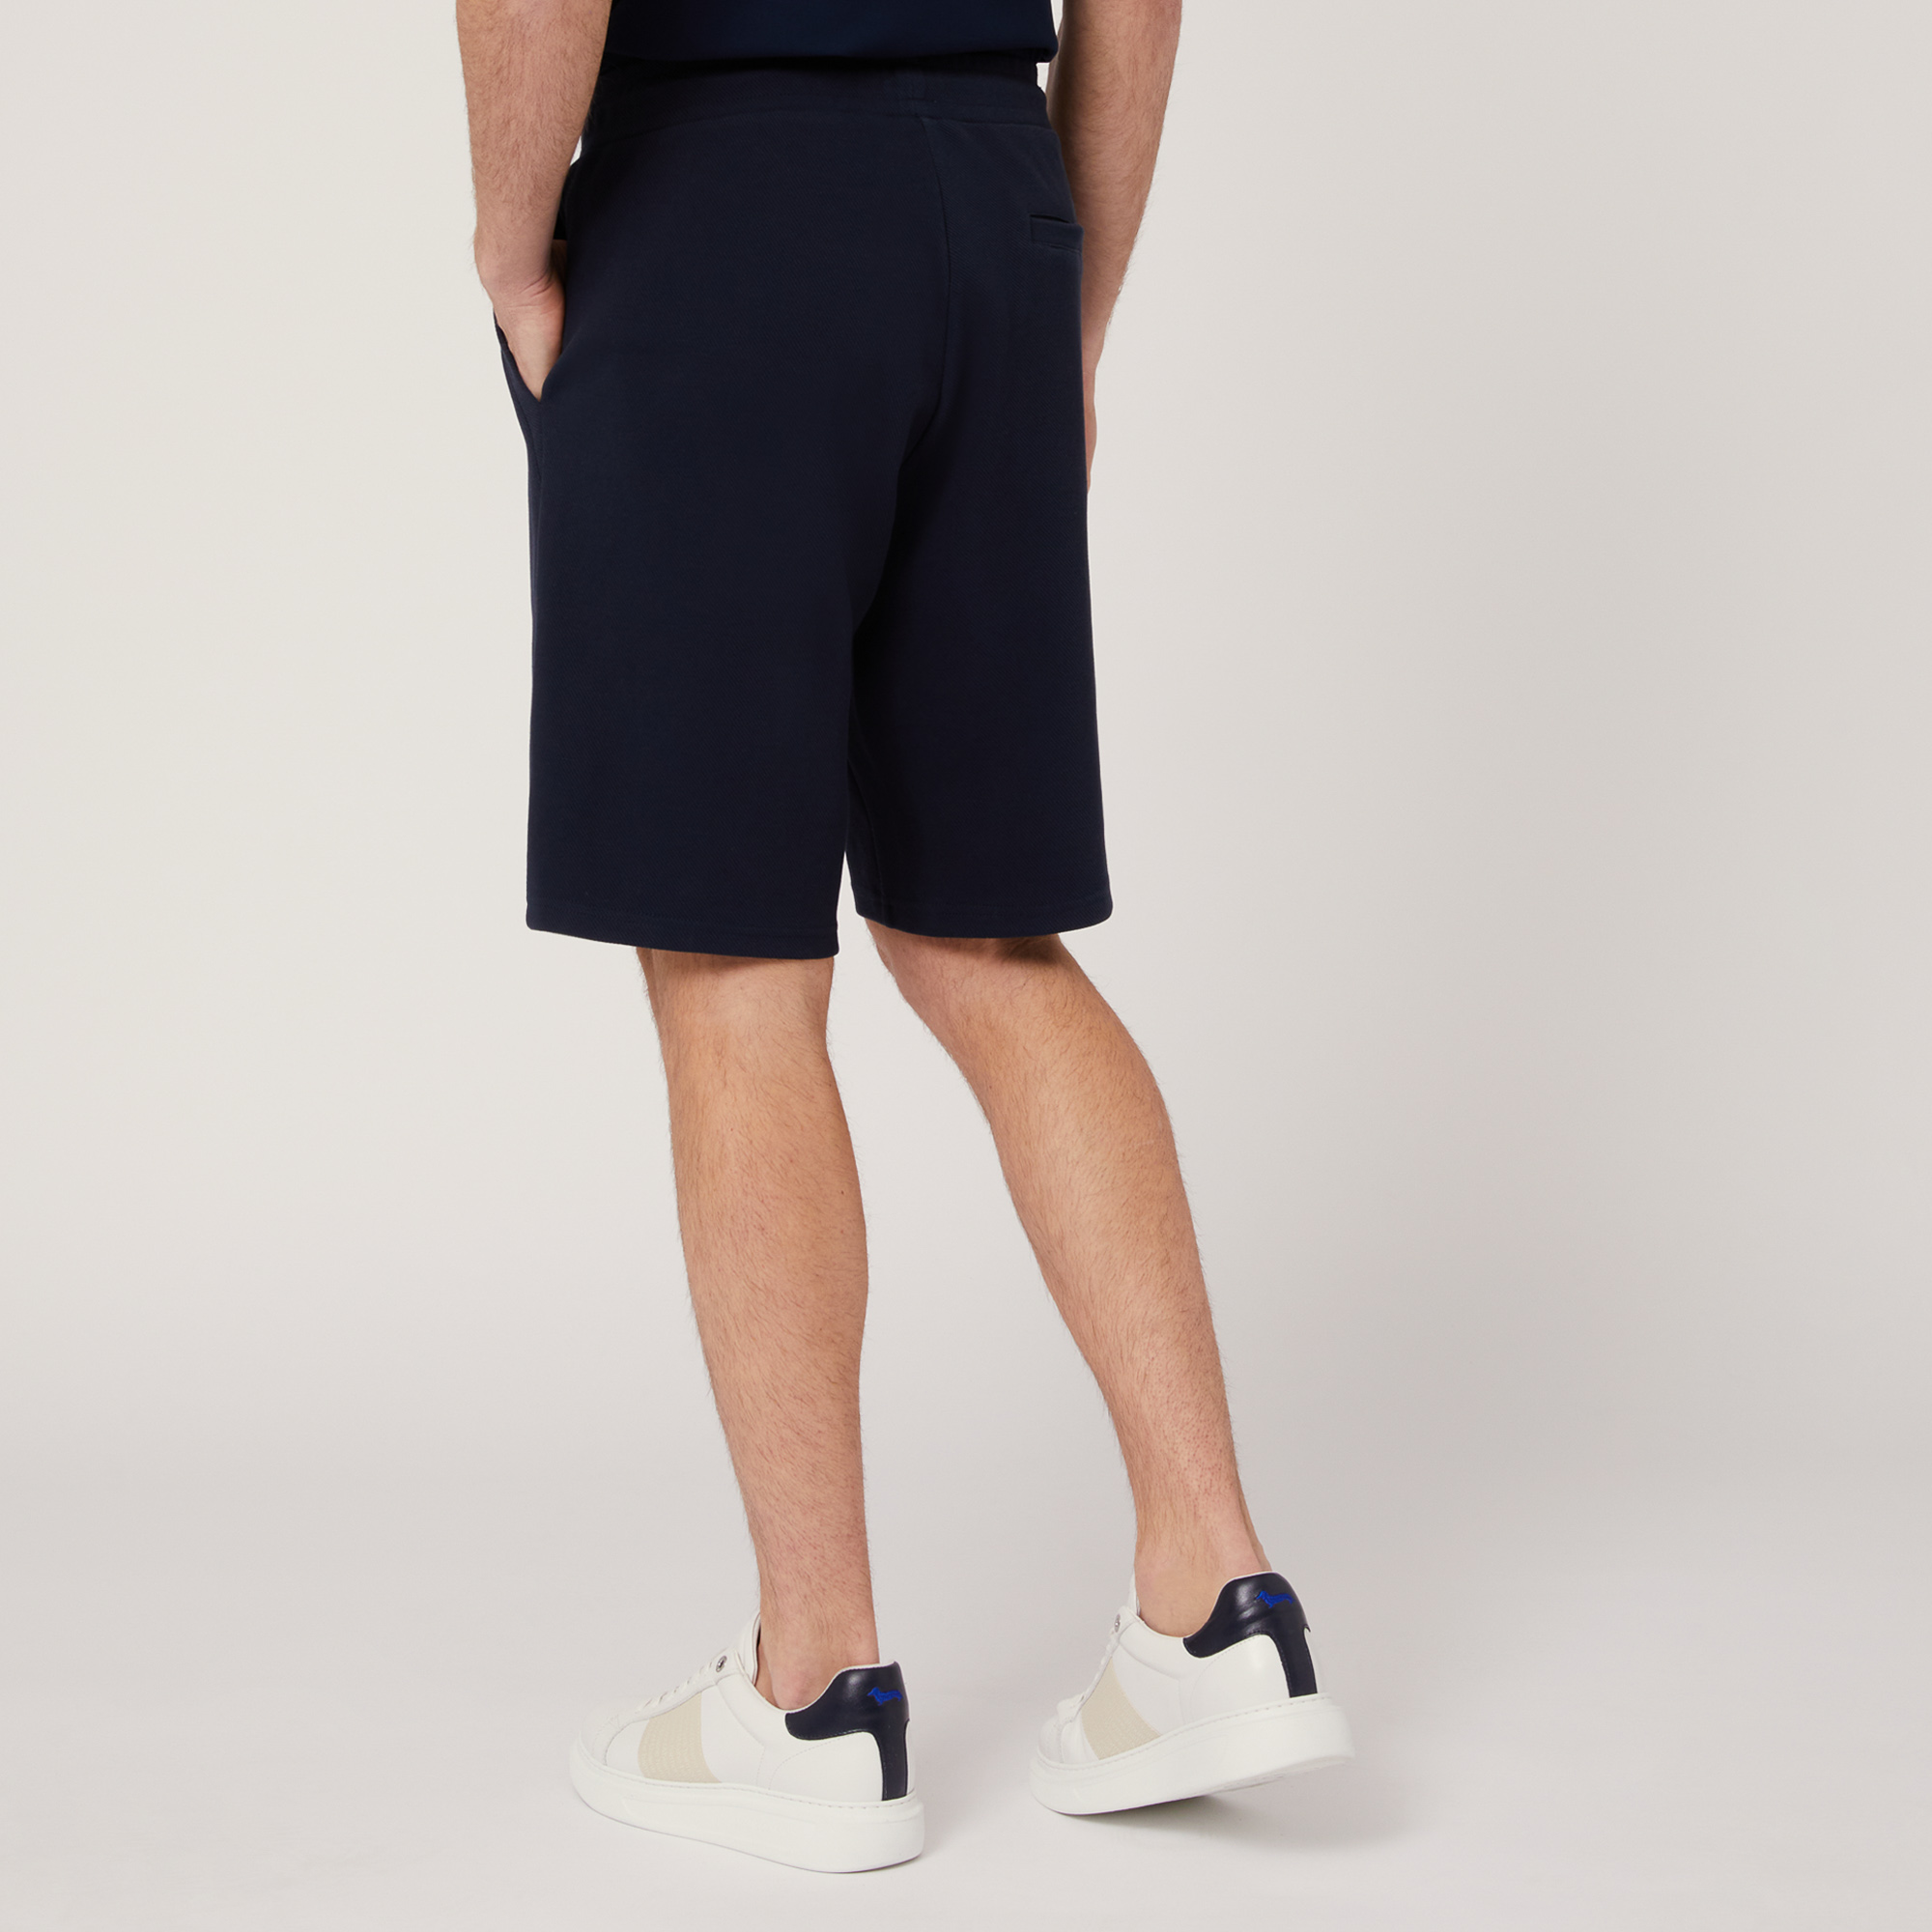 Shorts In Cotone Stretch Con Tasca Posteriore, Blu Navy, large image number 1